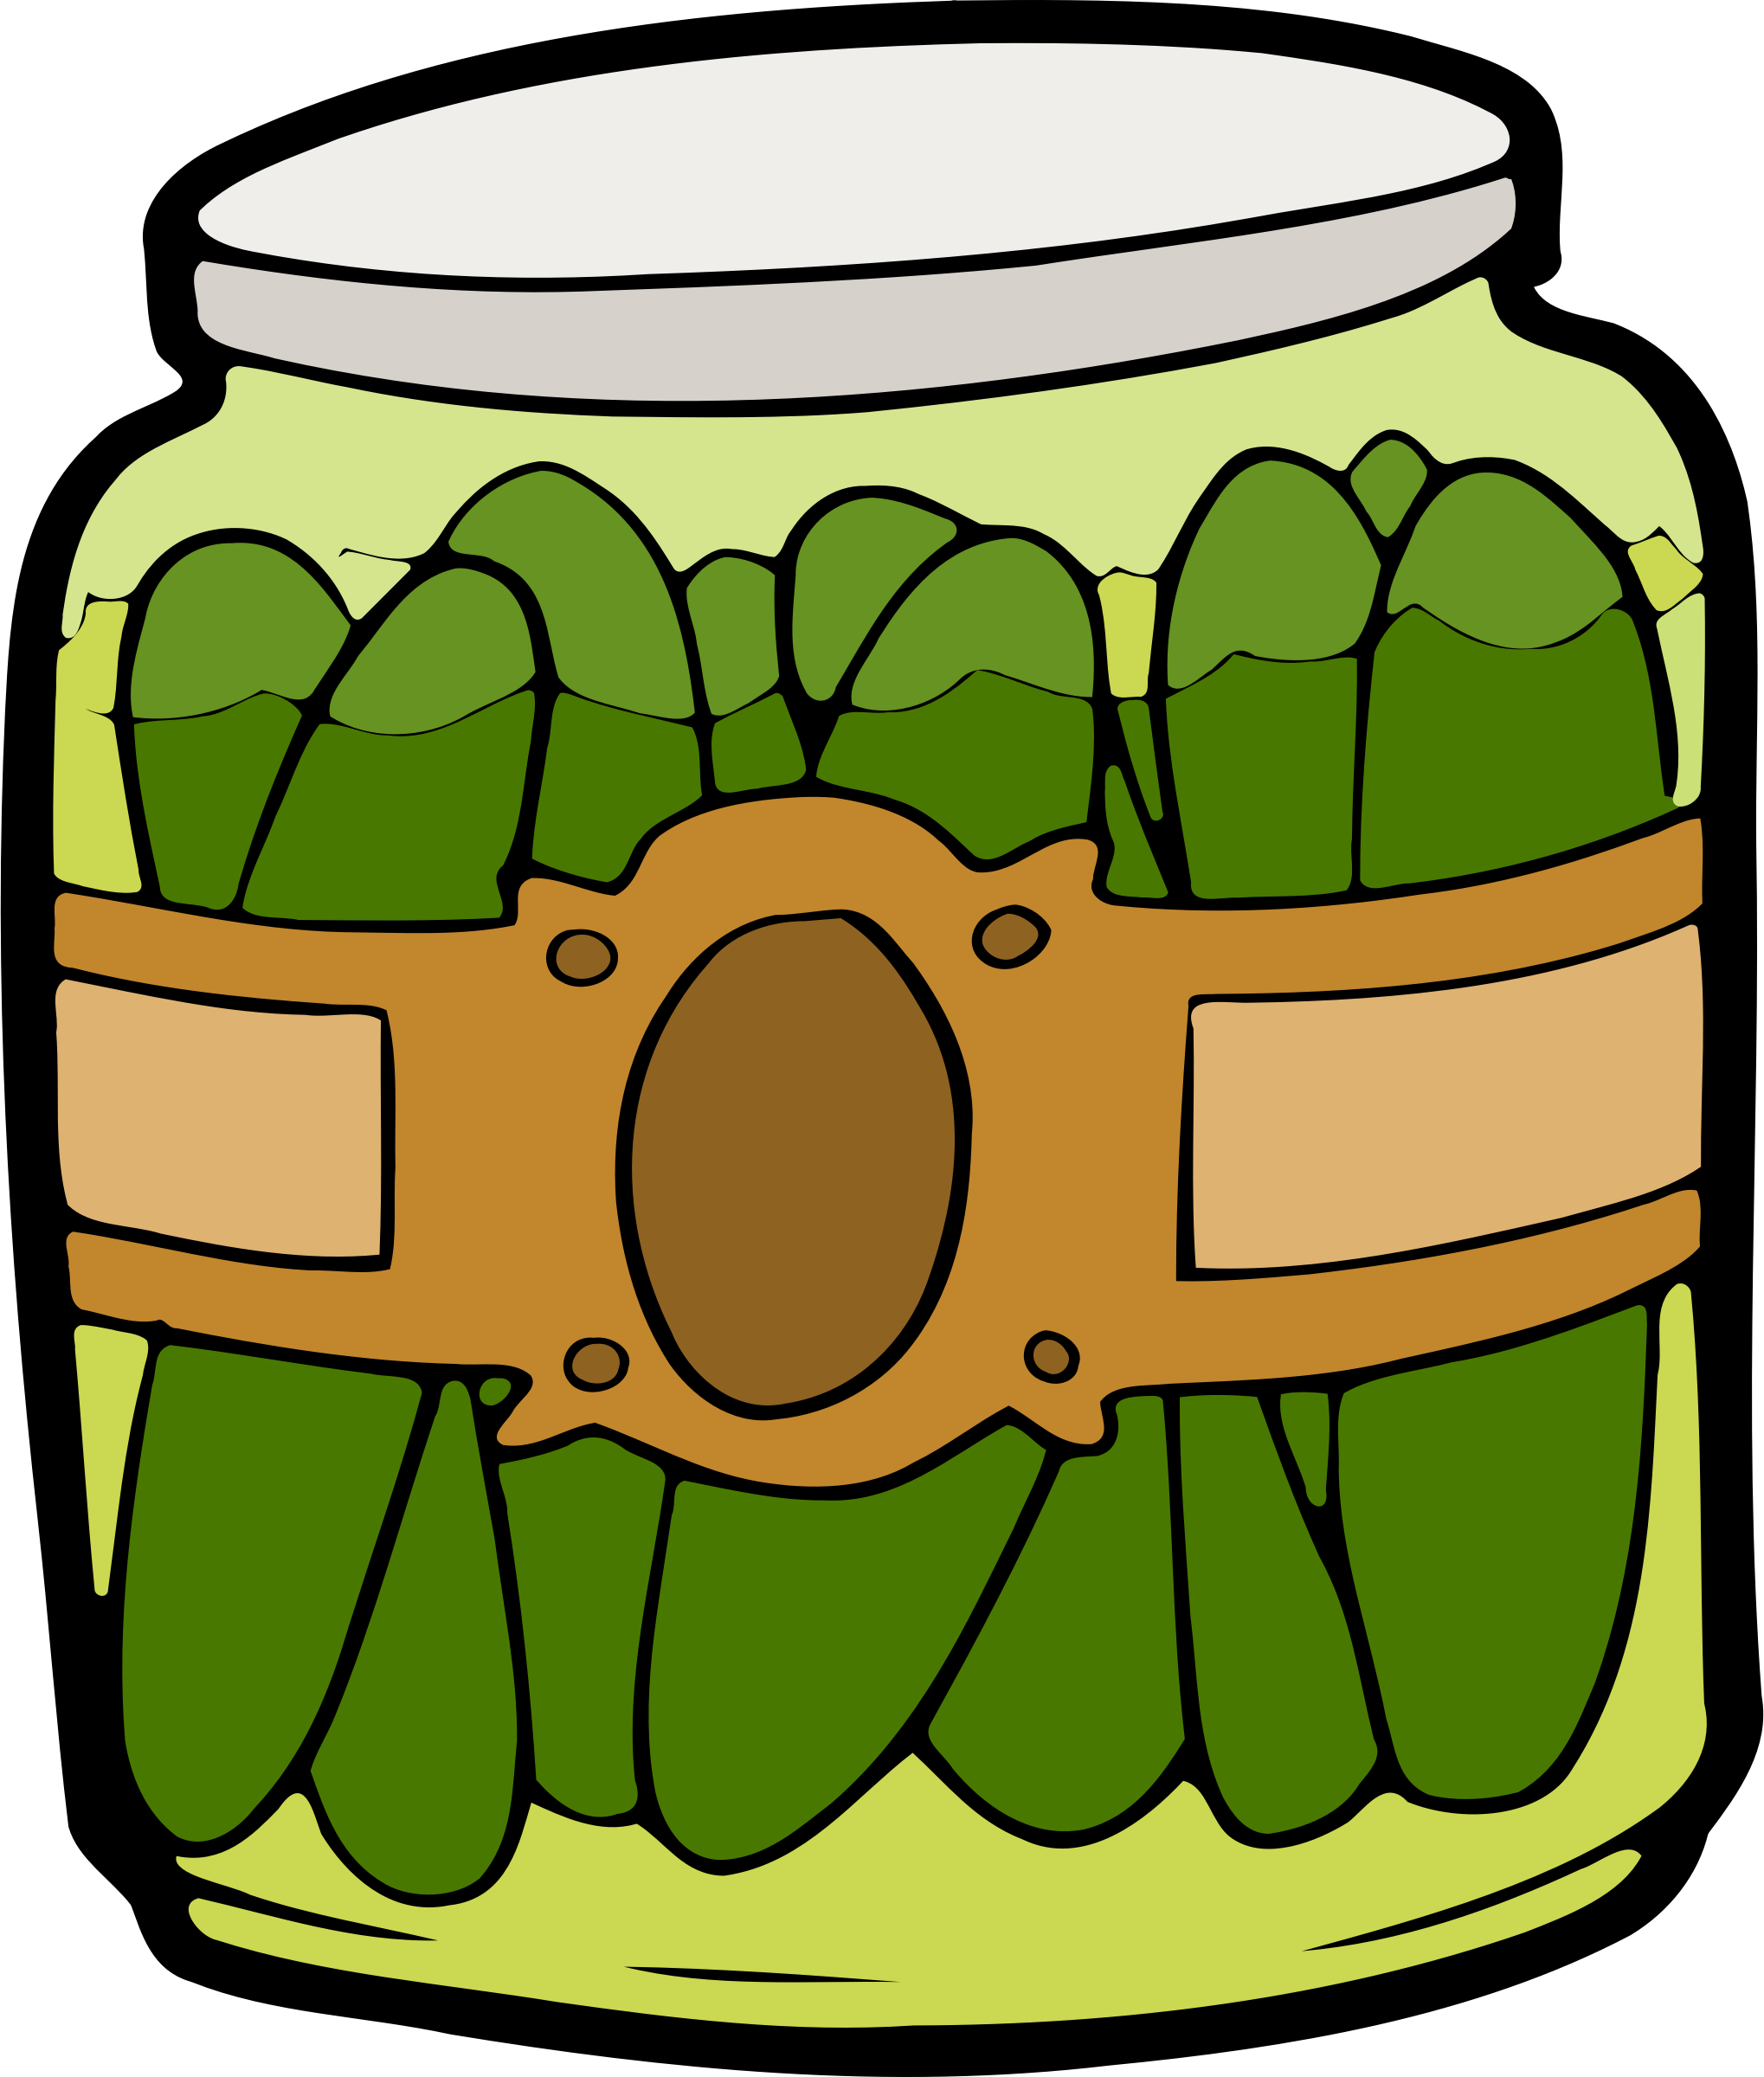 Jar of Pickles Vector Clipart image Free stock photo Public Domain